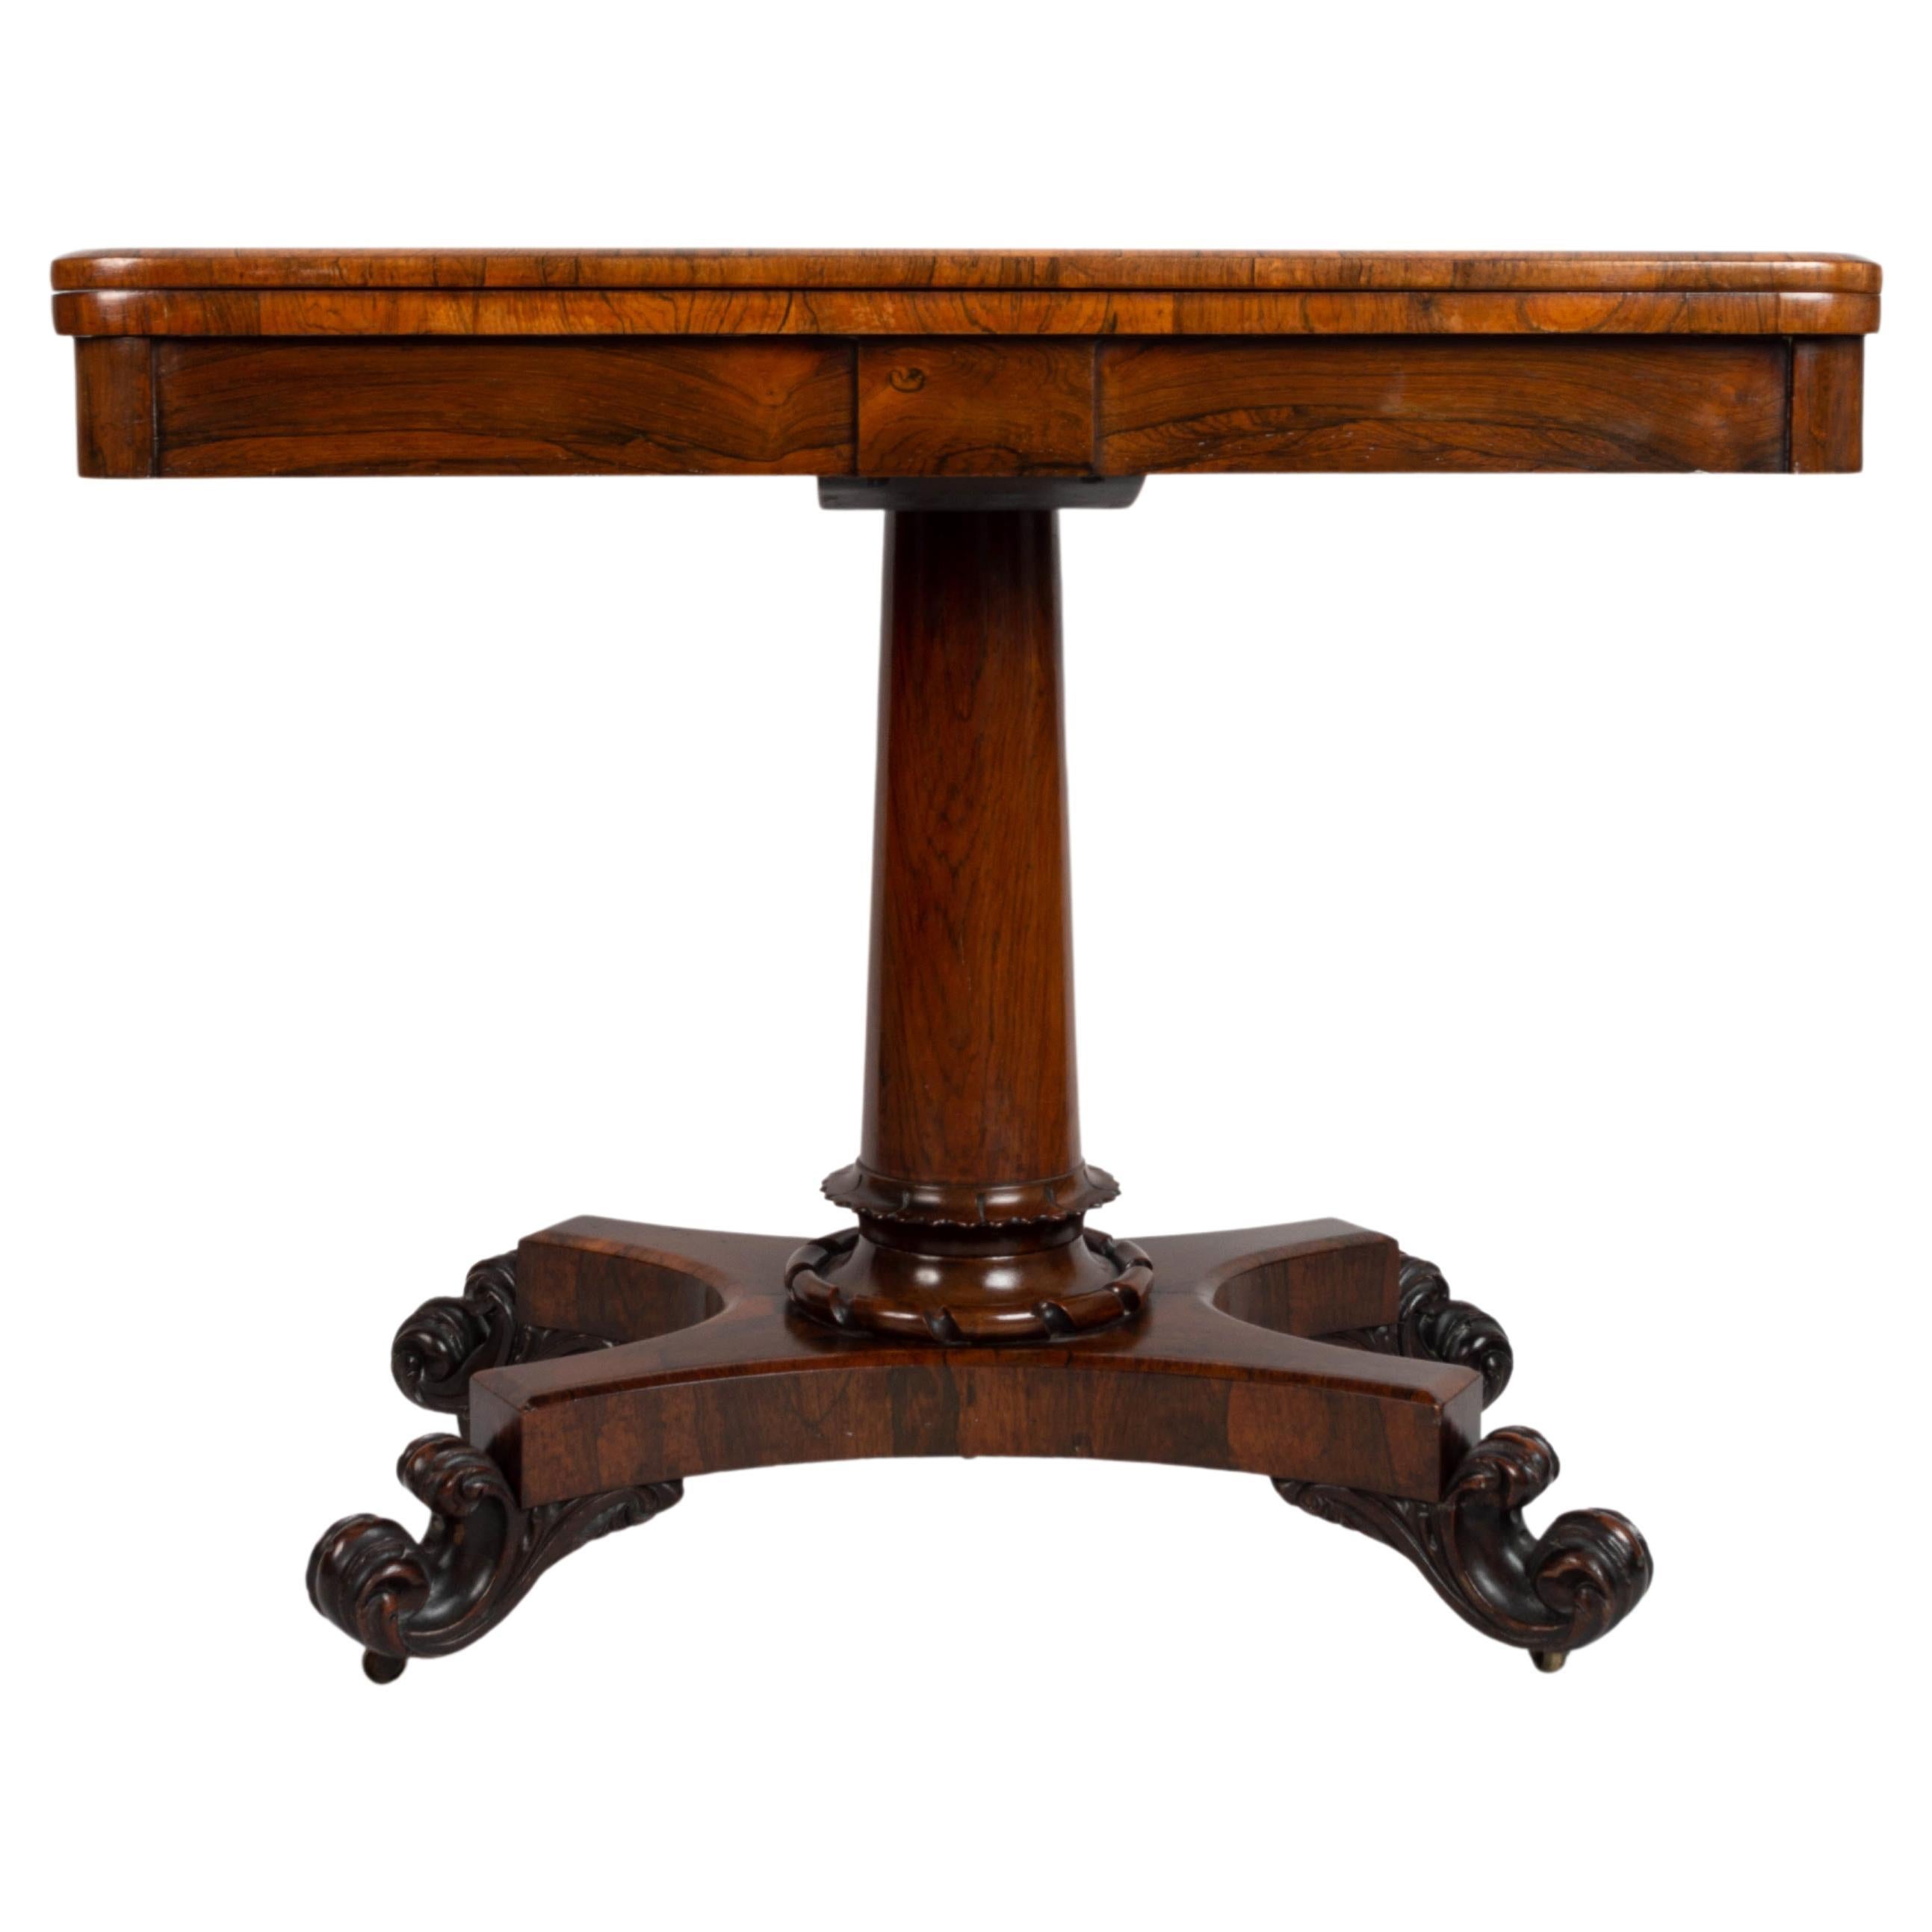 Antique English George IV rosewood card table by James Winter London, C.1825

A Georgian pedestal card table in beautifully figured rosewood throughout and
with a dark pink circular baize lining. A lapit carved base to the column, on a shaped